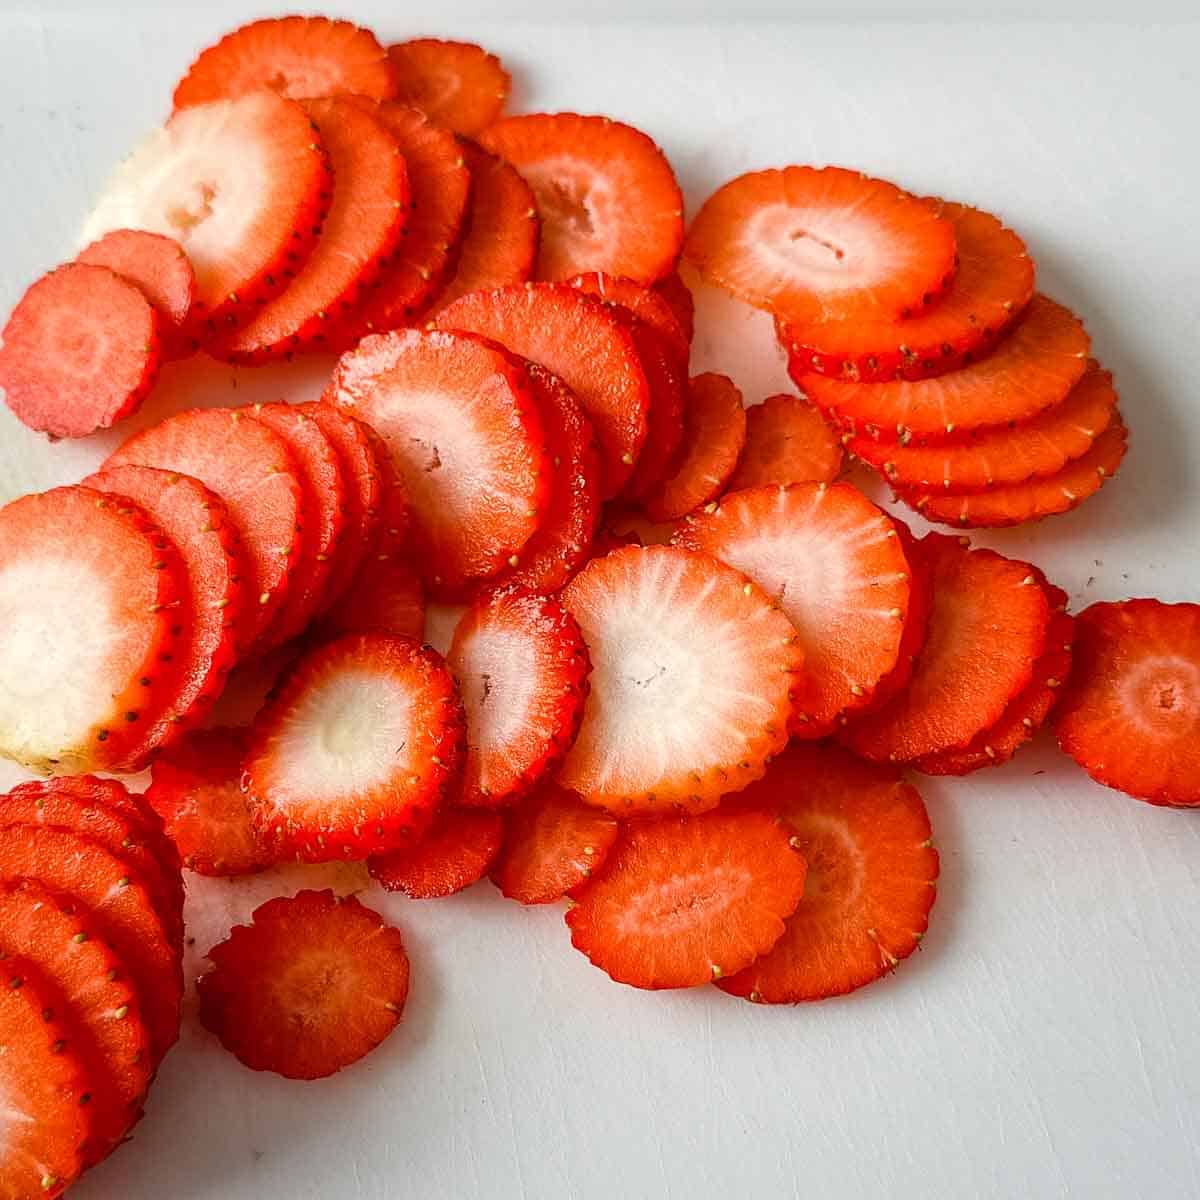 Sliced strawberries sit on a white cutting board.